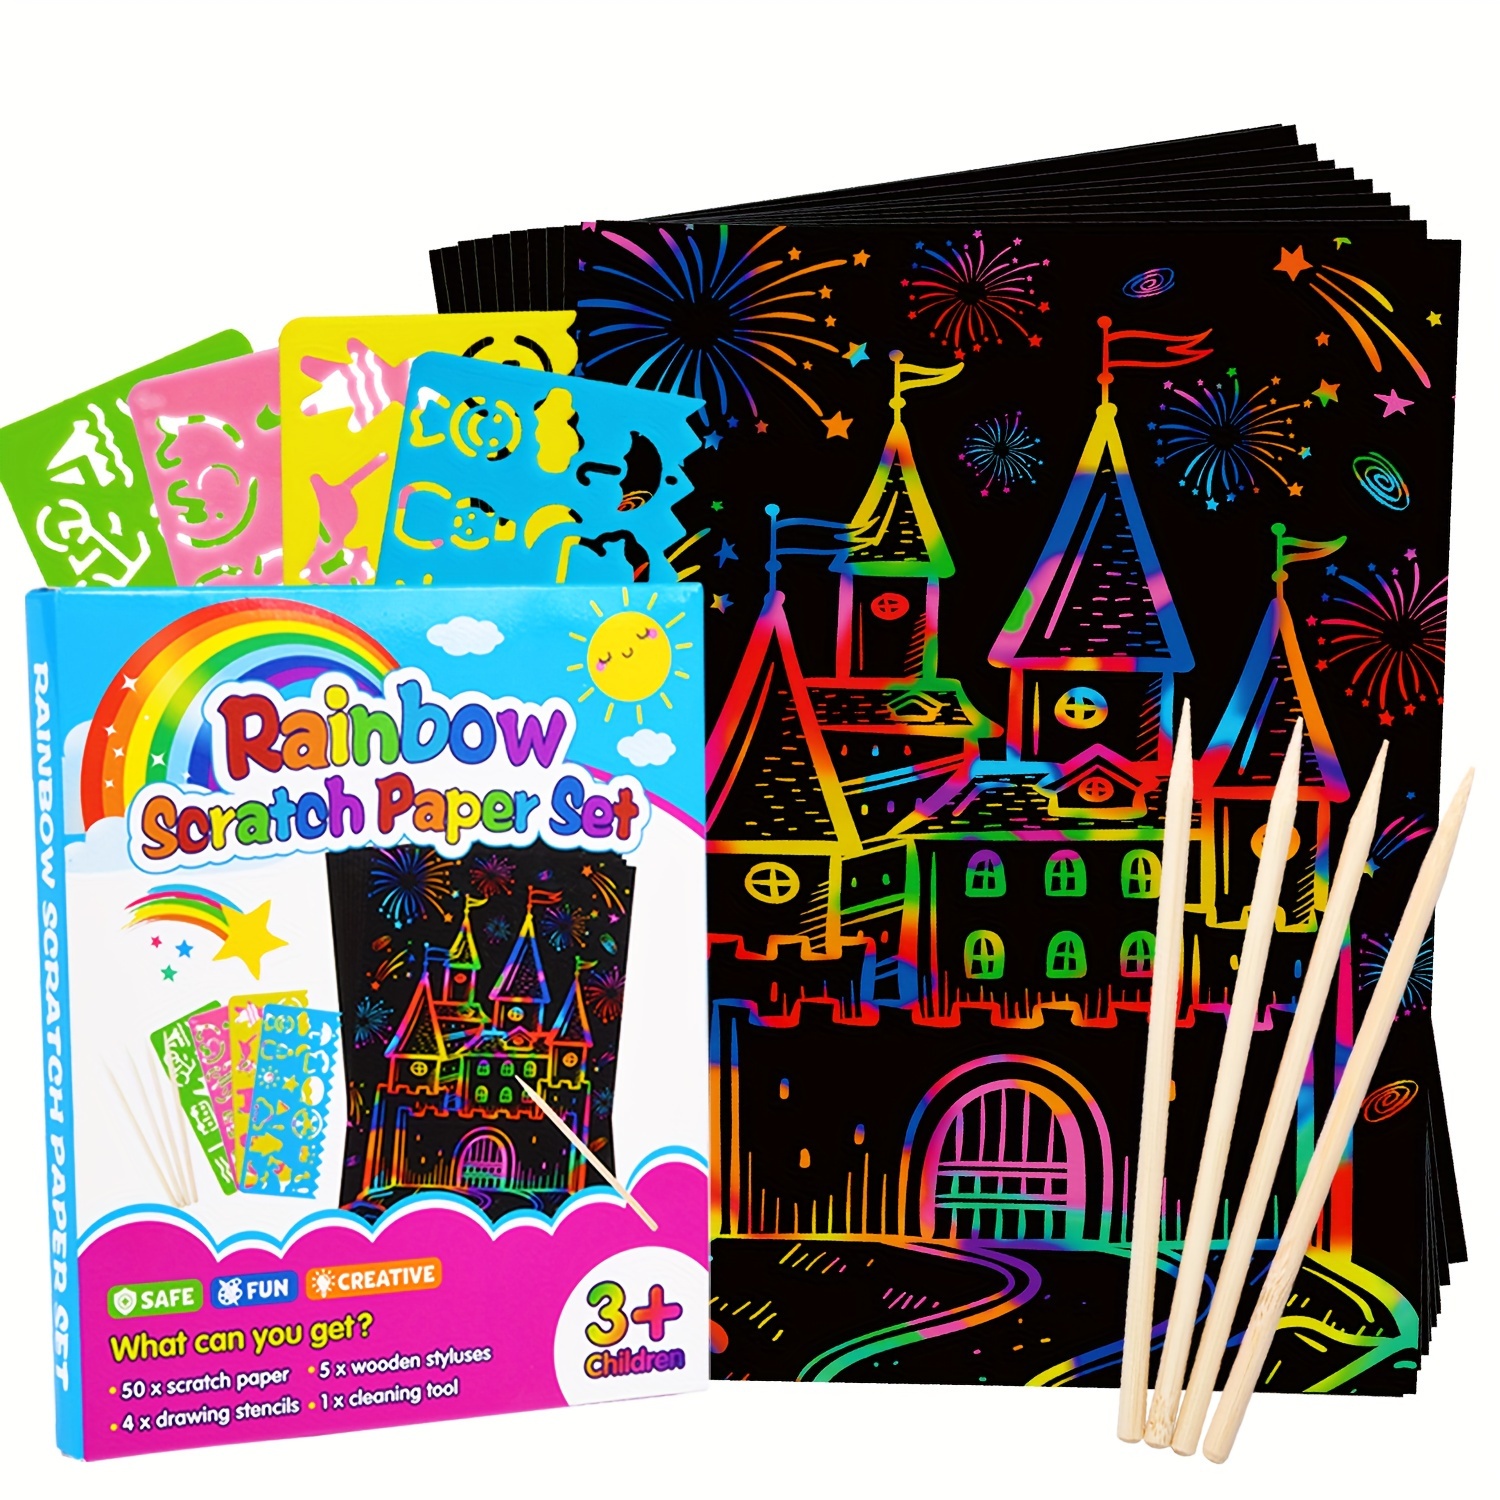  RMJOY Rainbow Scratch Paper Sets: 60pcs Magic Art Craft Scratch  Off Papers Supplies Kits Pad for Age 3-12 Kids Girl Boy Teen Toy Game Gift  for Birthday, Party Favor, DIY Activities